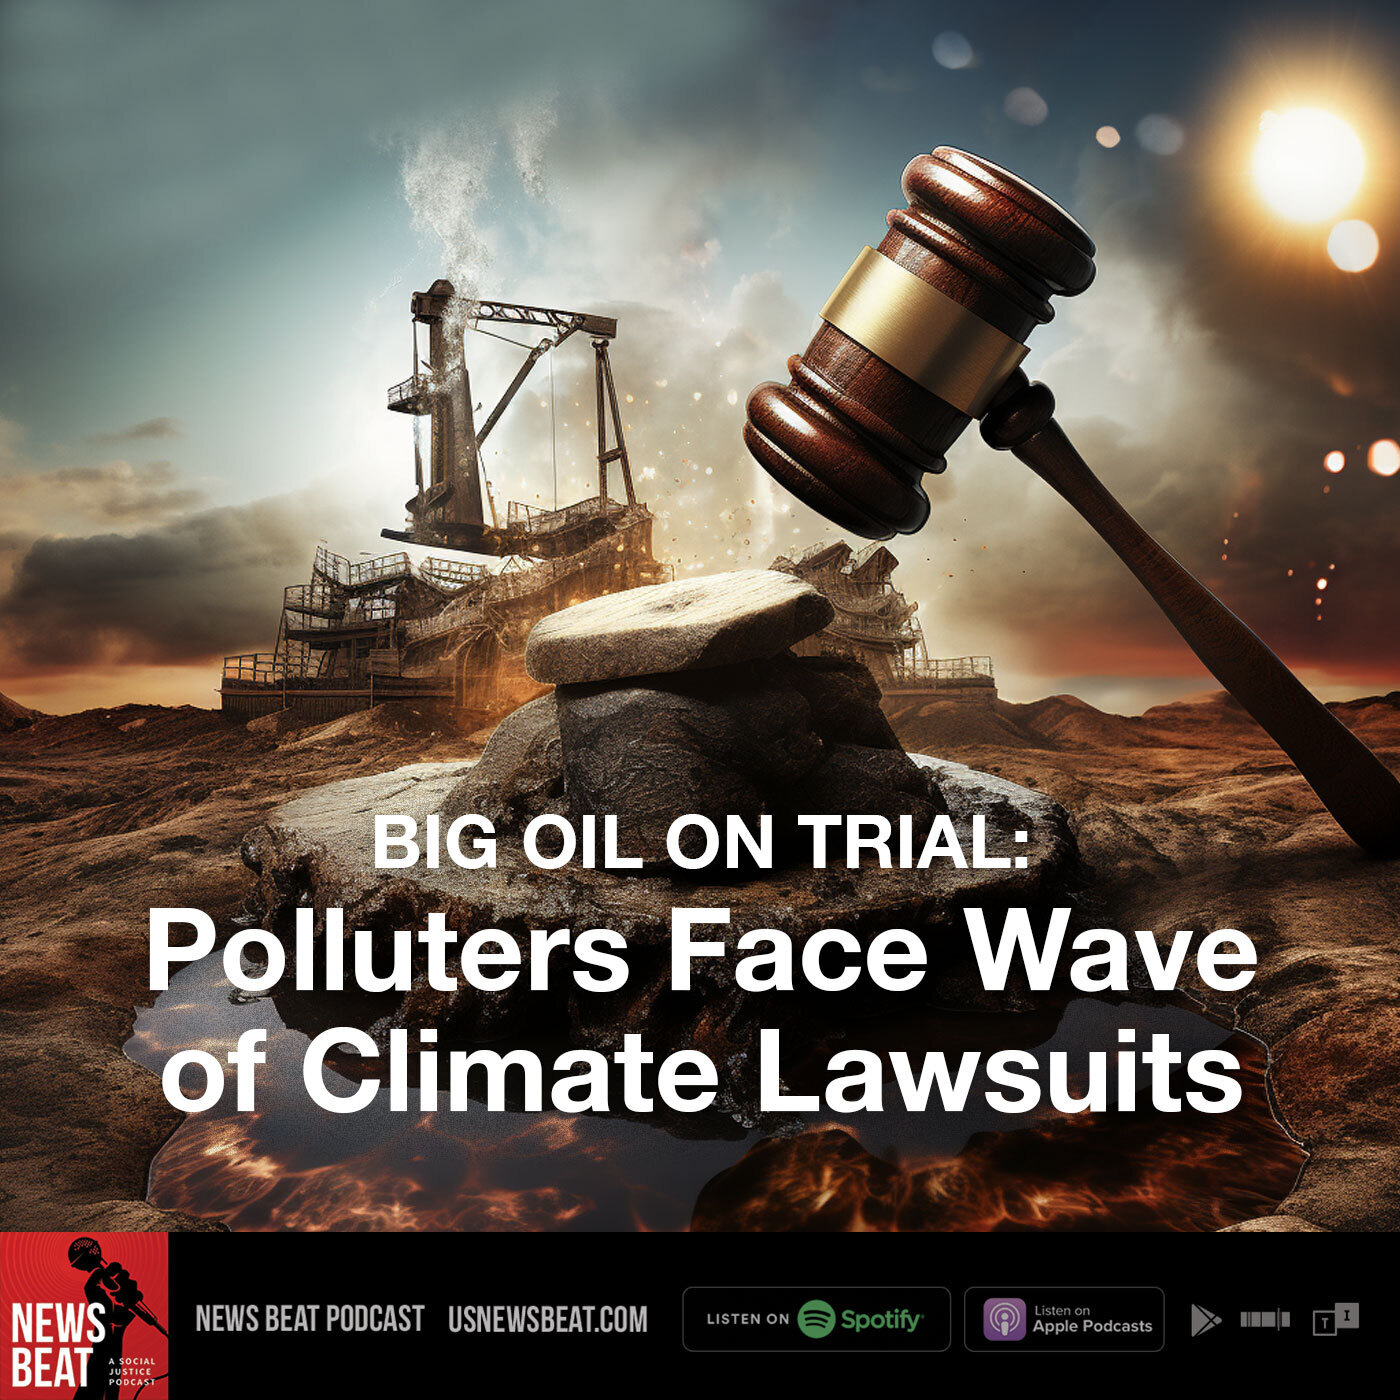 Big Oil On Trial: Polluters Face Wave of Climate Lawsuits